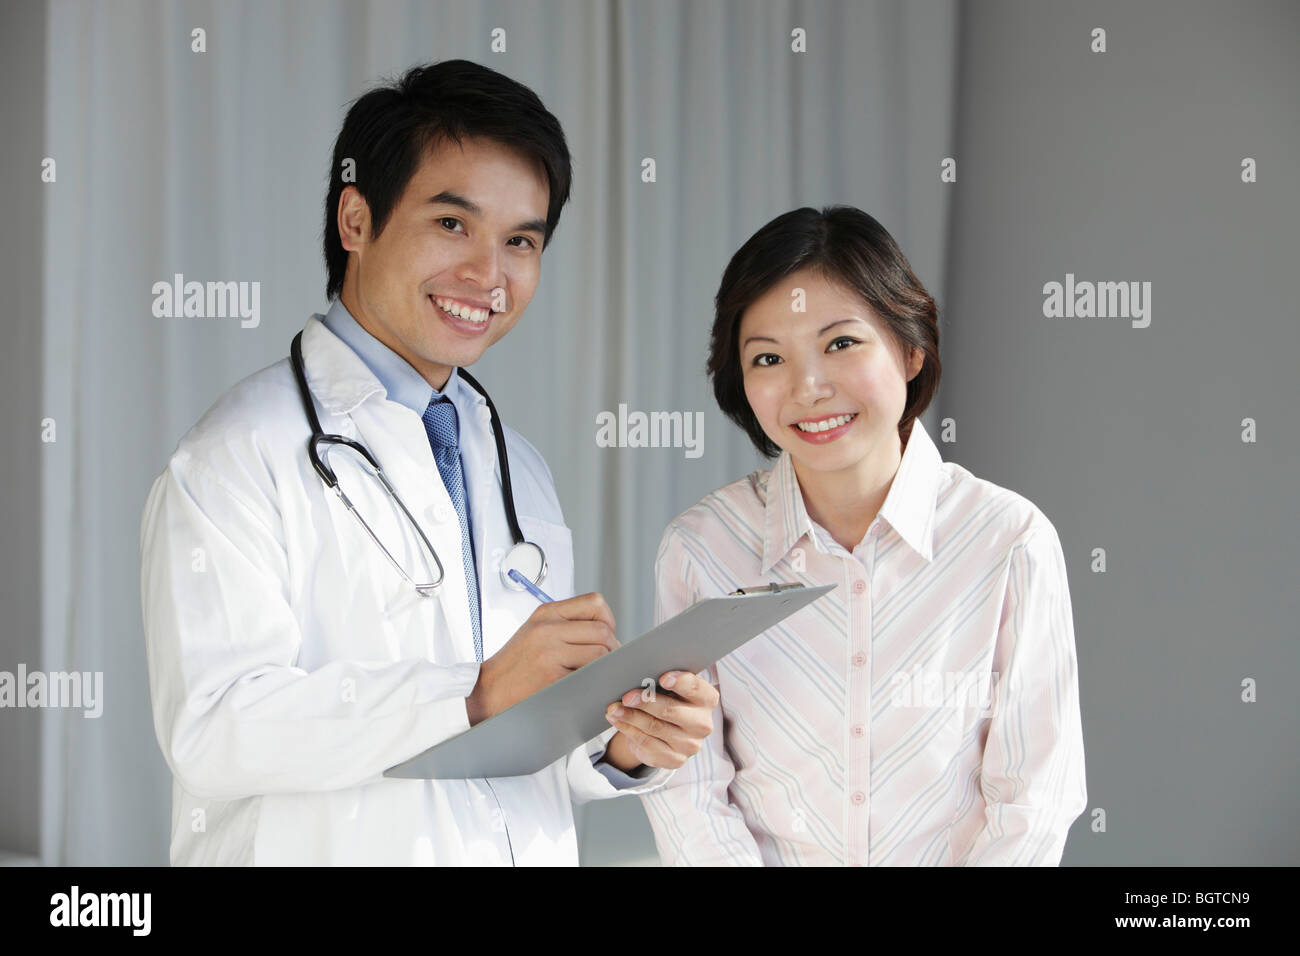 Doctor talking to female patient Stock Photo